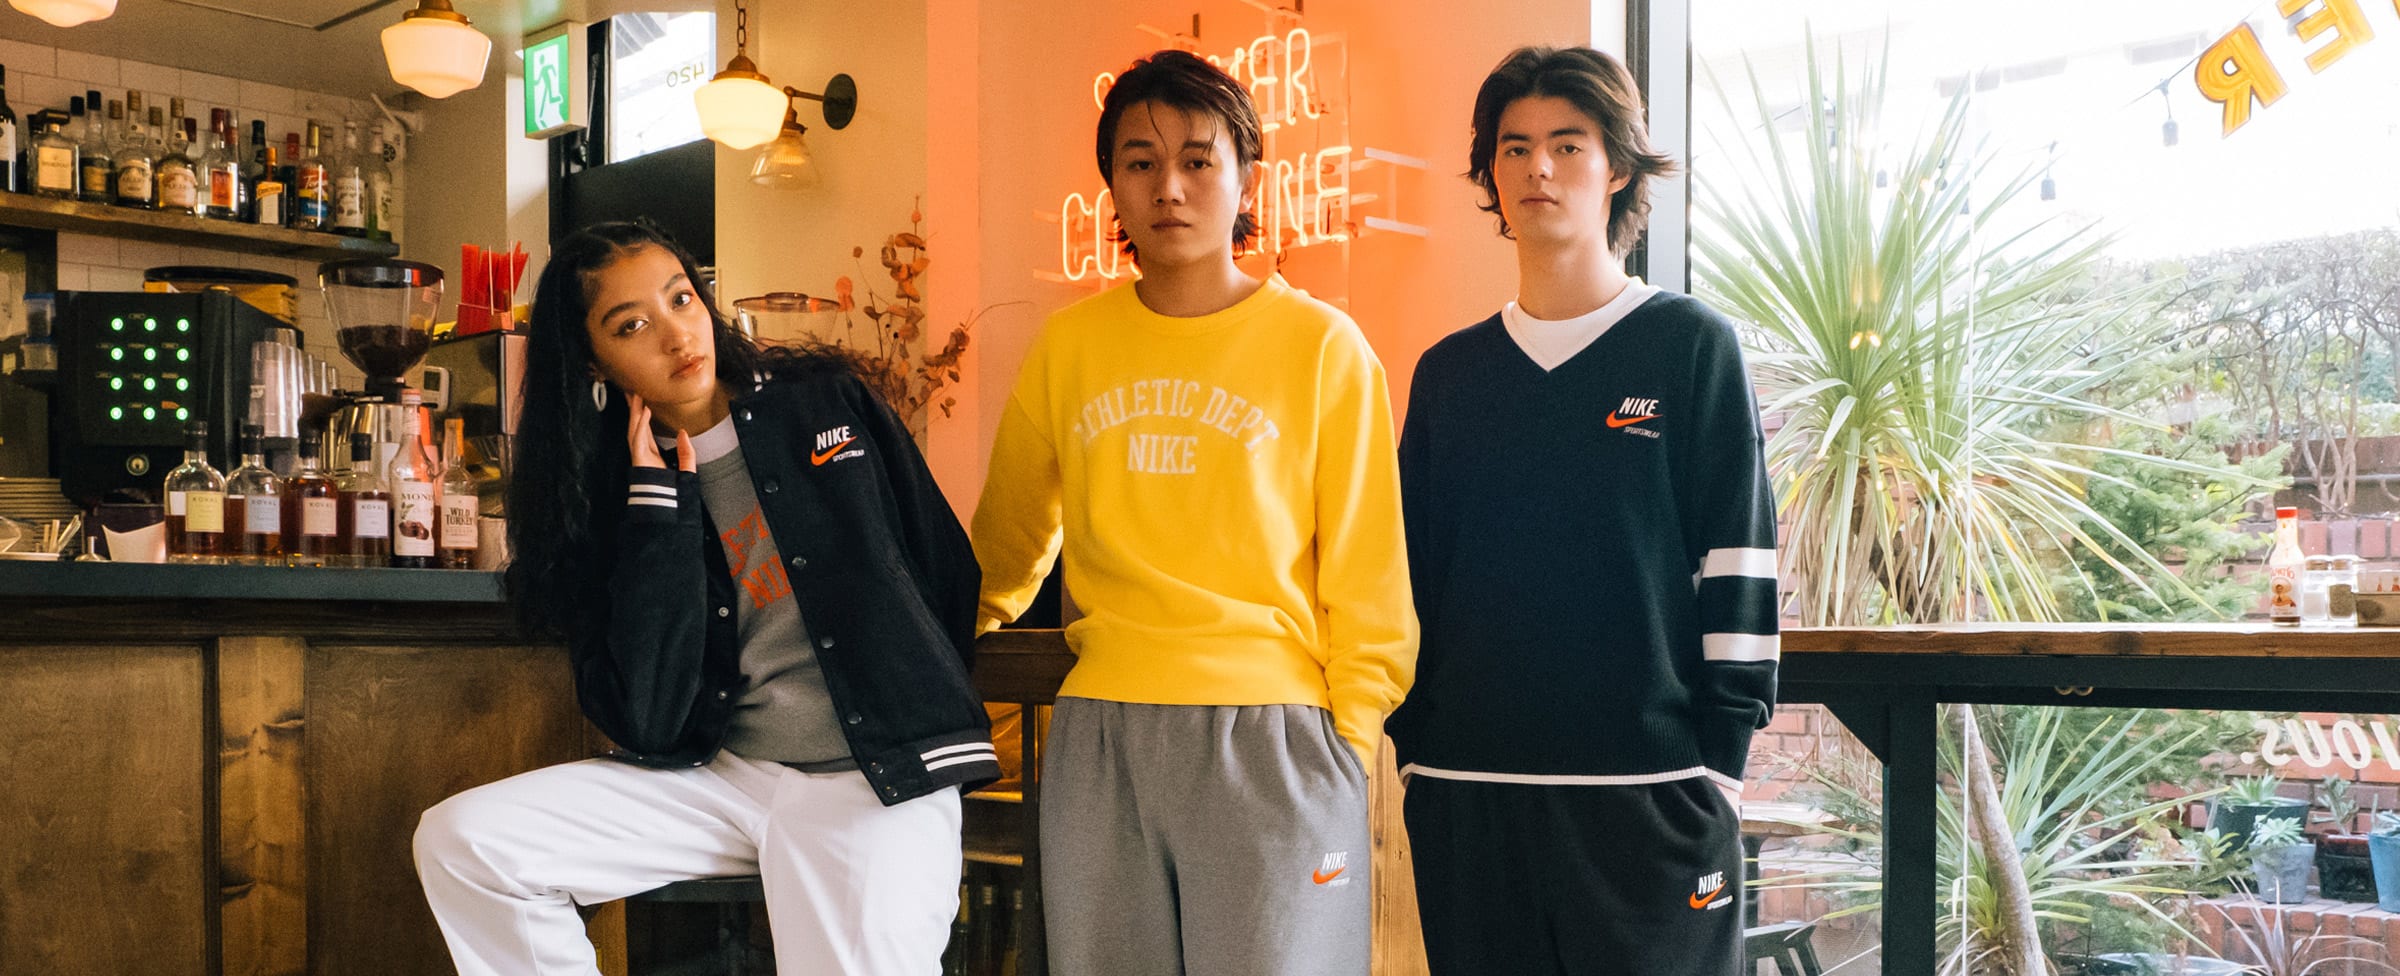 "Nike Trend Capsule Apparel Collection"